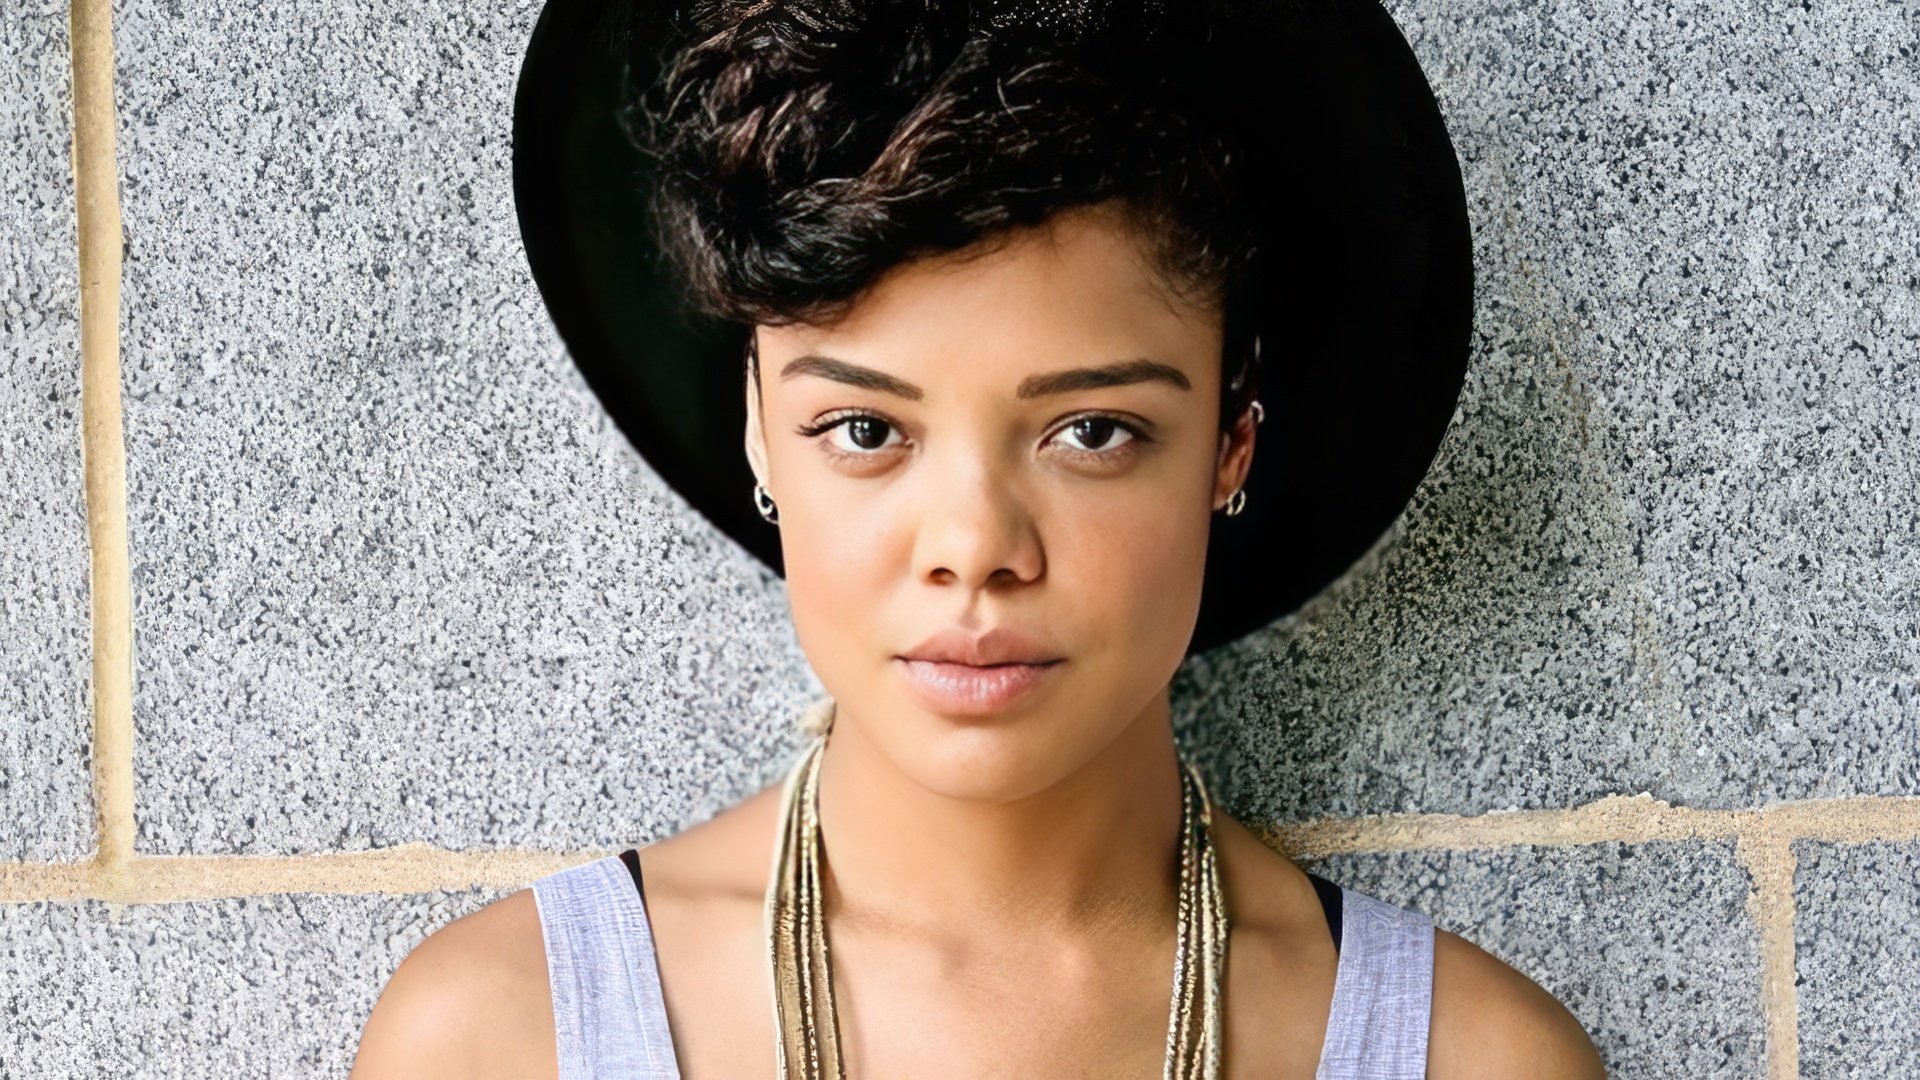 By nationality, Tessa Thompson is an American with Afro-Panamanian, European and Mexican roots